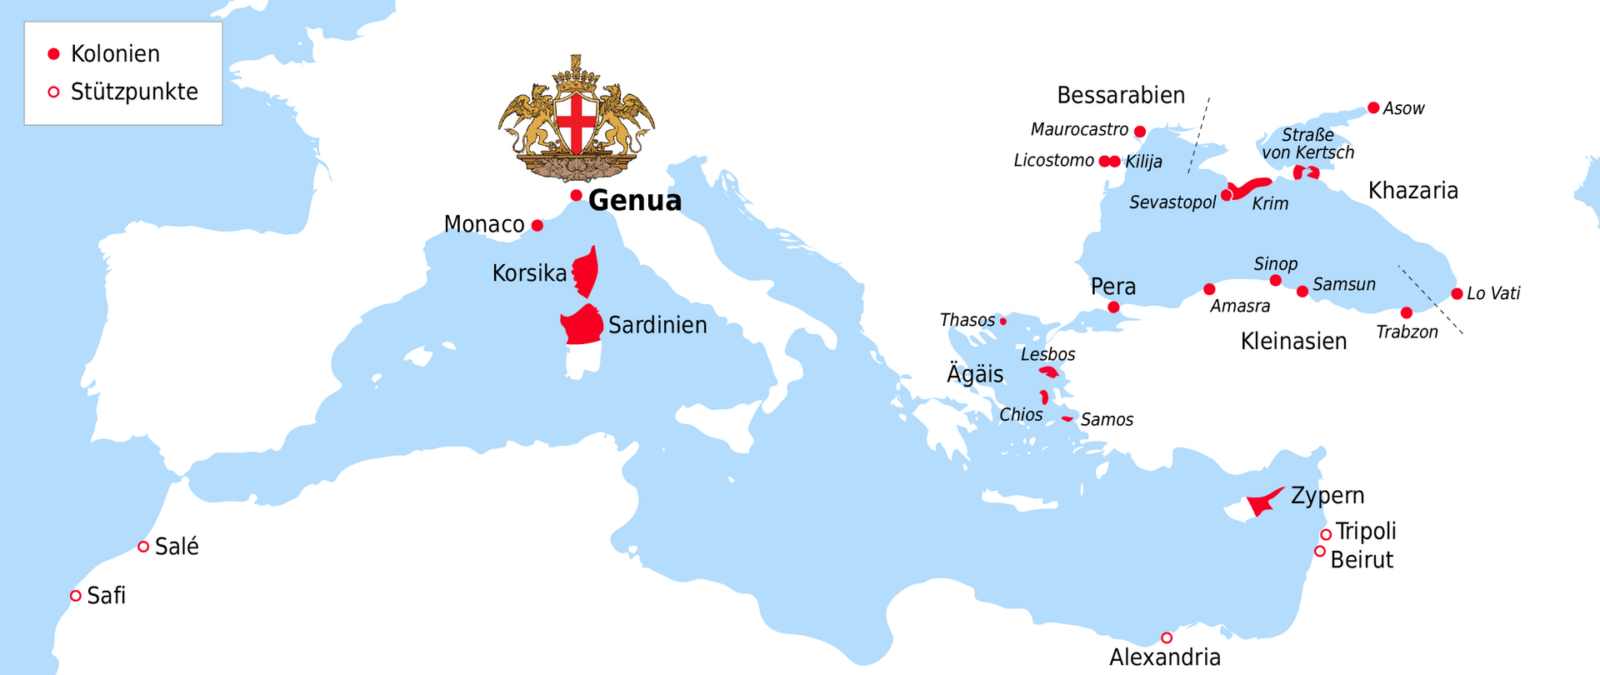 Colonies and strongholds of Genoa on the Black Sea coast